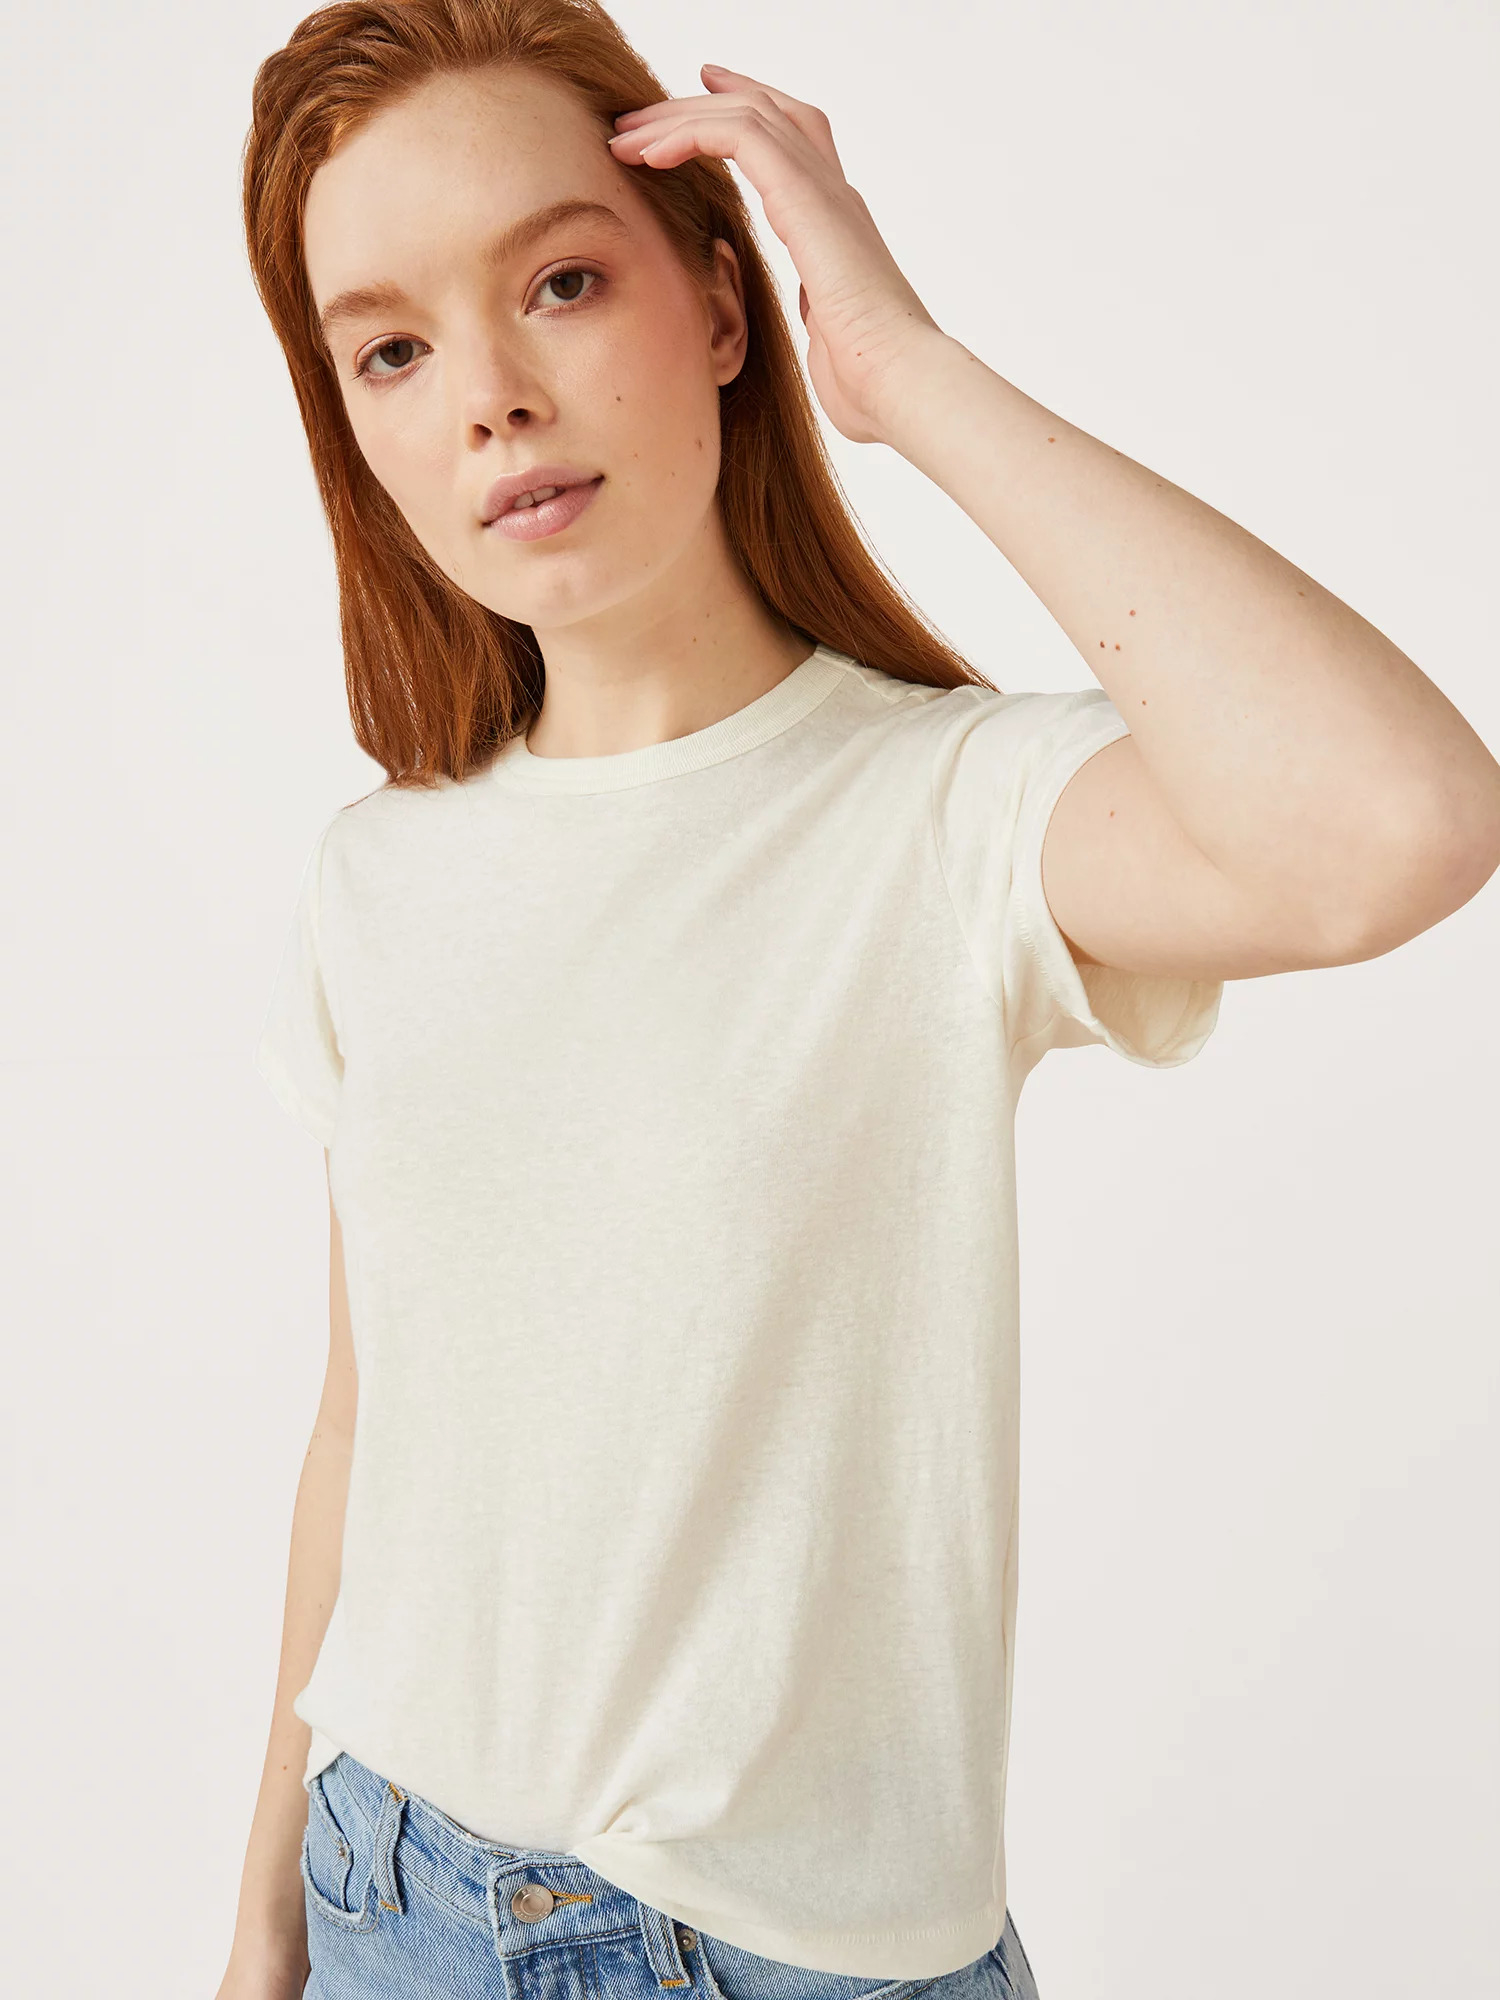 Model wearing the claw white shirt